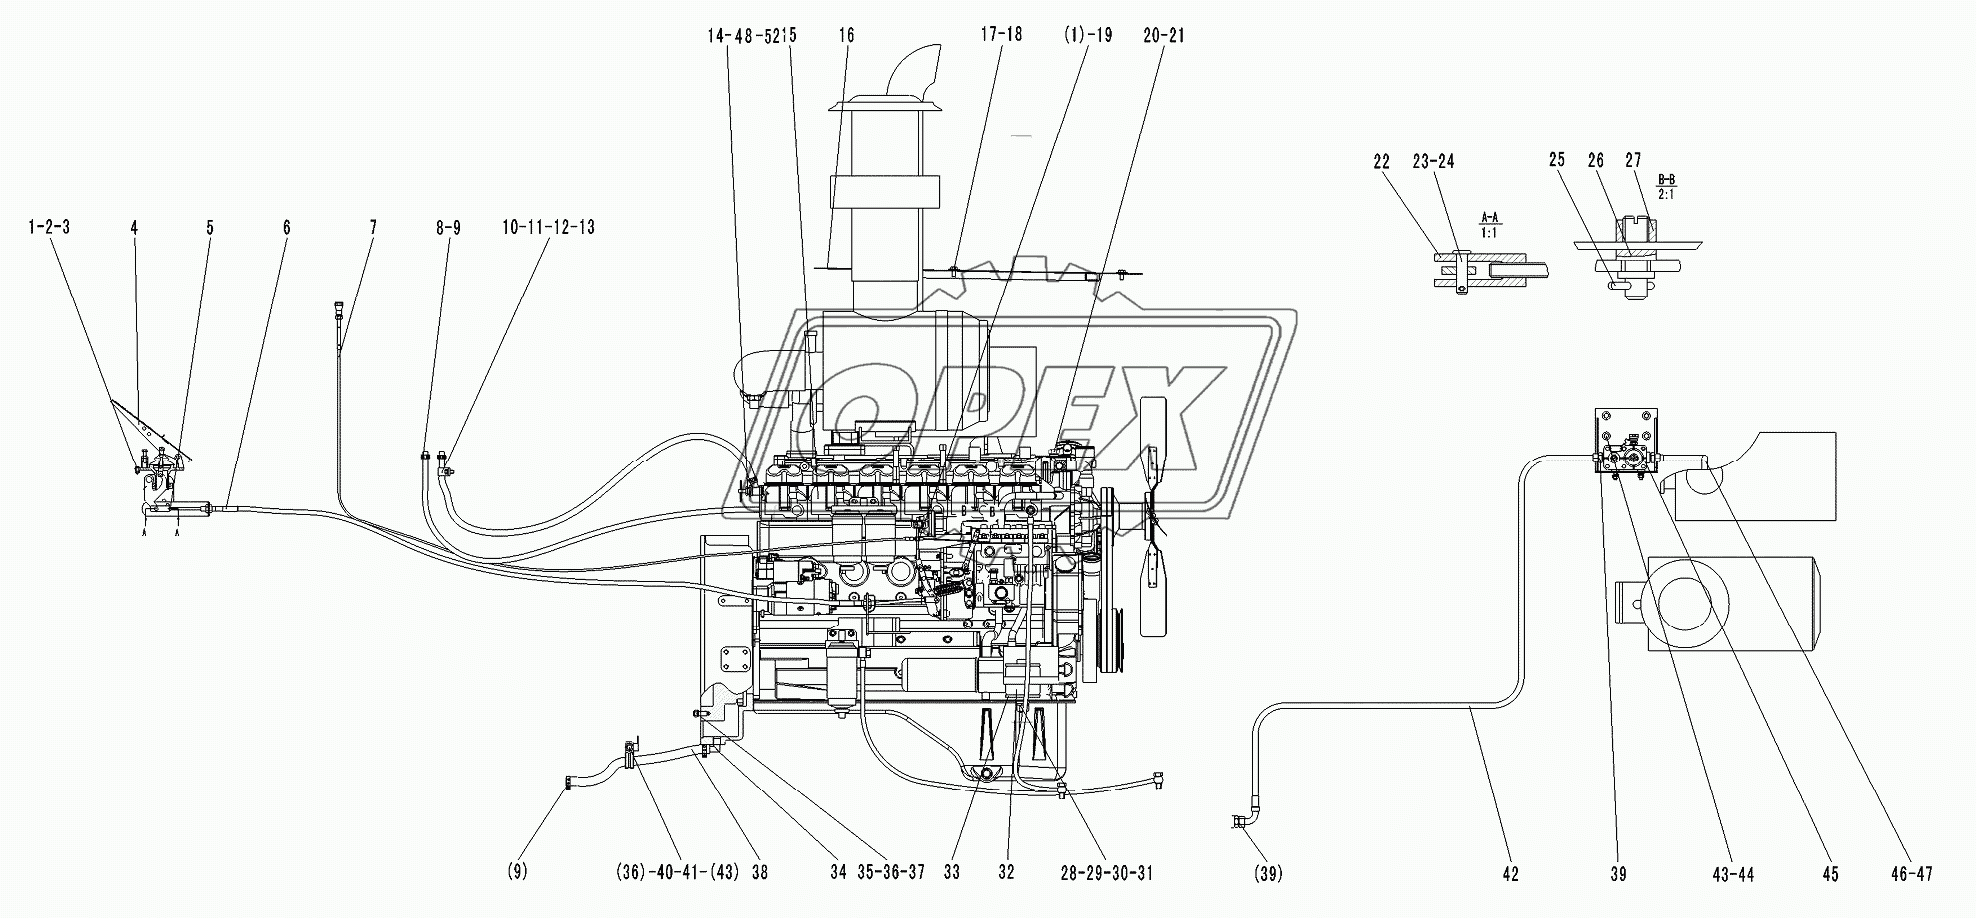 DIESEL ENGINE ASSEMBLY